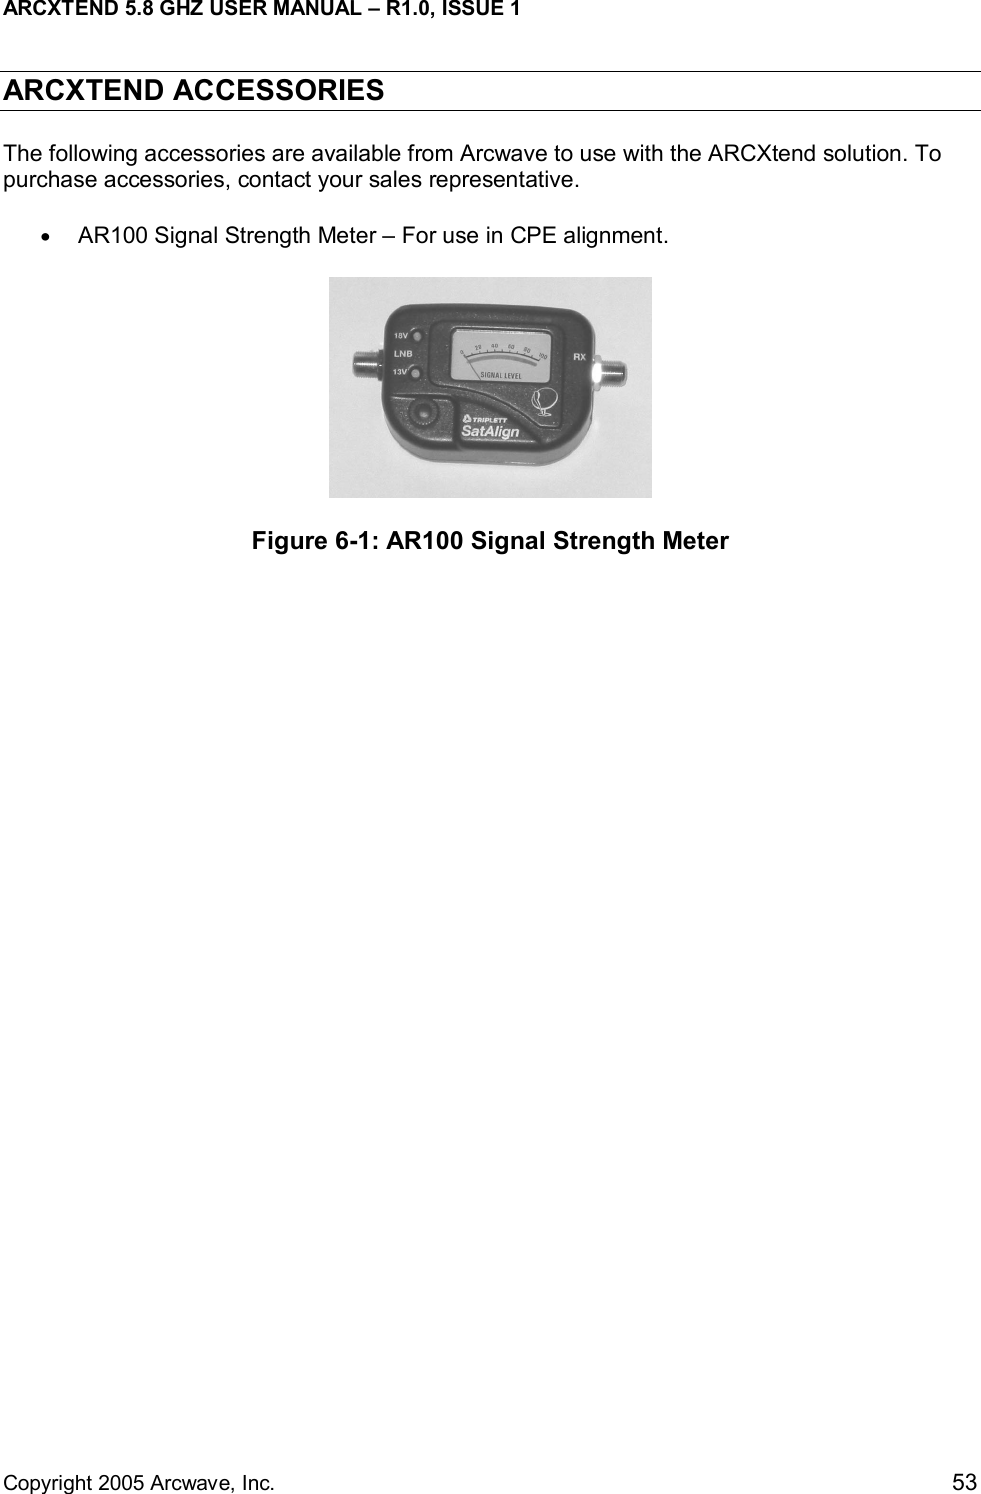 ARCXTEND 5.8 GHZ USER MANUAL – R1.0, ISSUE 1  Copyright 2005 Arcwave, Inc.    53 ARCXTEND ACCESSORIES The following accessories are available from Arcwave to use with the ARCXtend solution. To purchase accessories, contact your sales representative. •  AR100 Signal Strength Meter – For use in CPE alignment.   Figure 6-1: AR100 Signal Strength Meter 